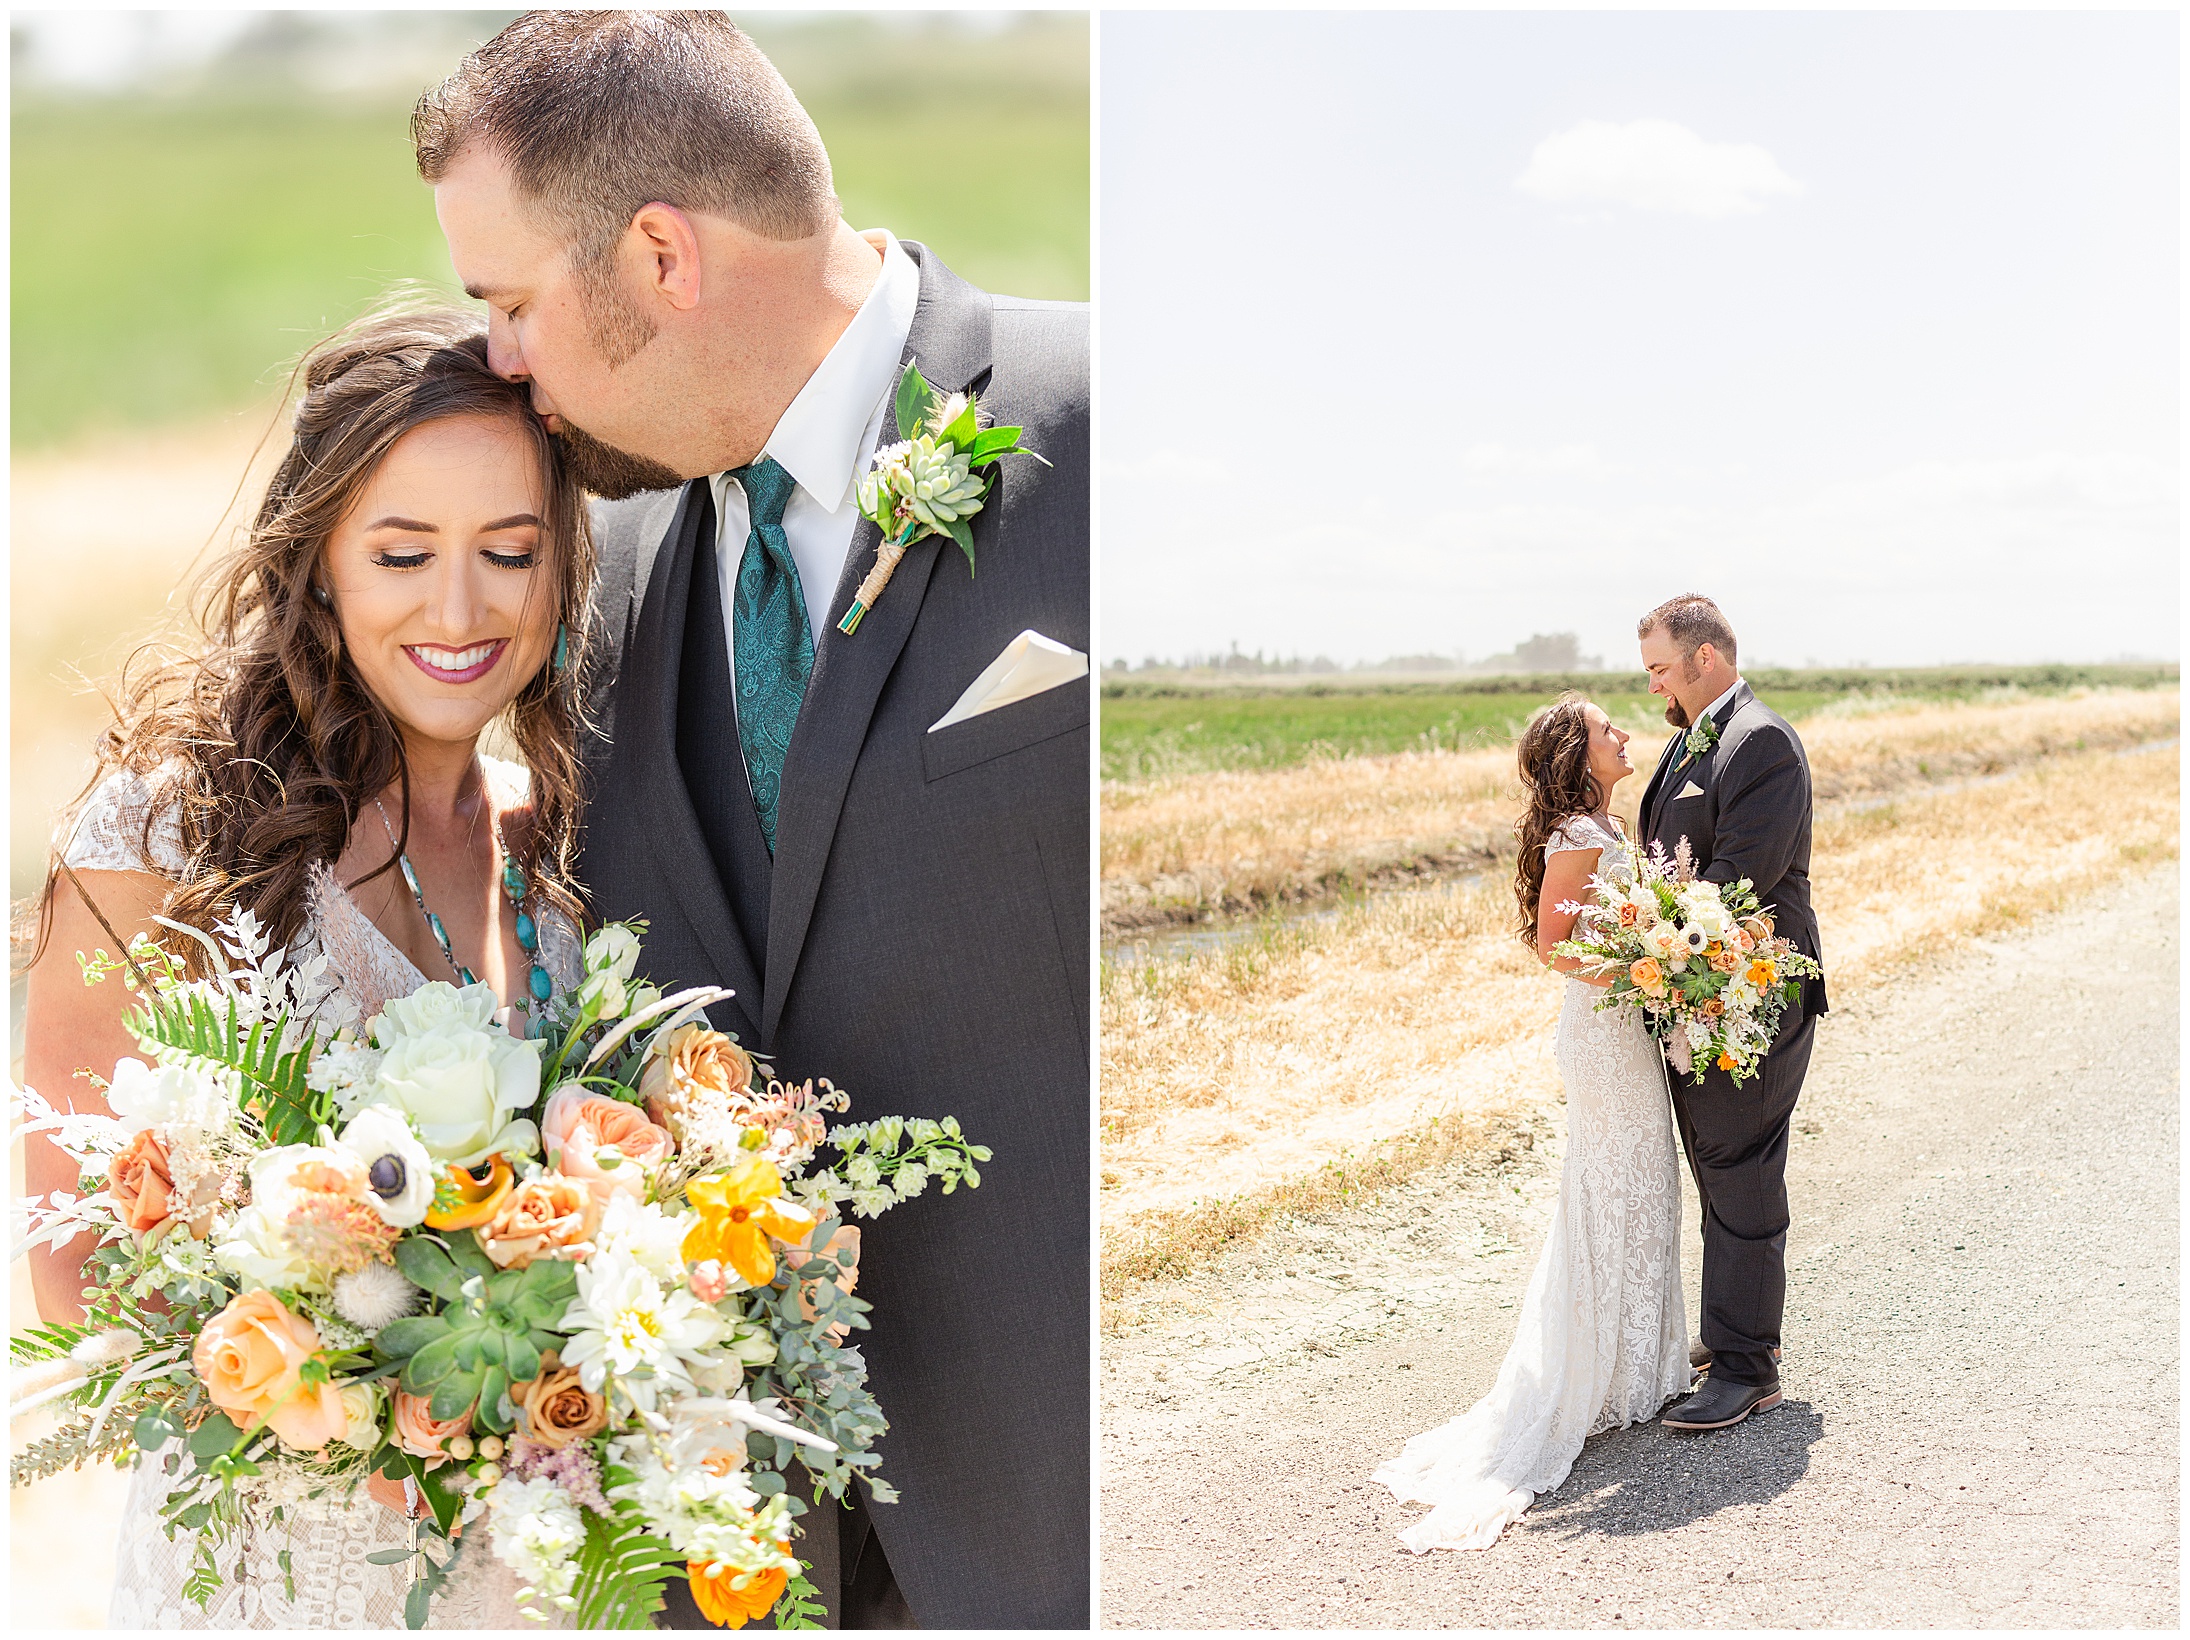 Private Estate Dairy Farm Country Wedding Willows CA Peacock Teal Dresses Cowboy Boots Horse Dog,